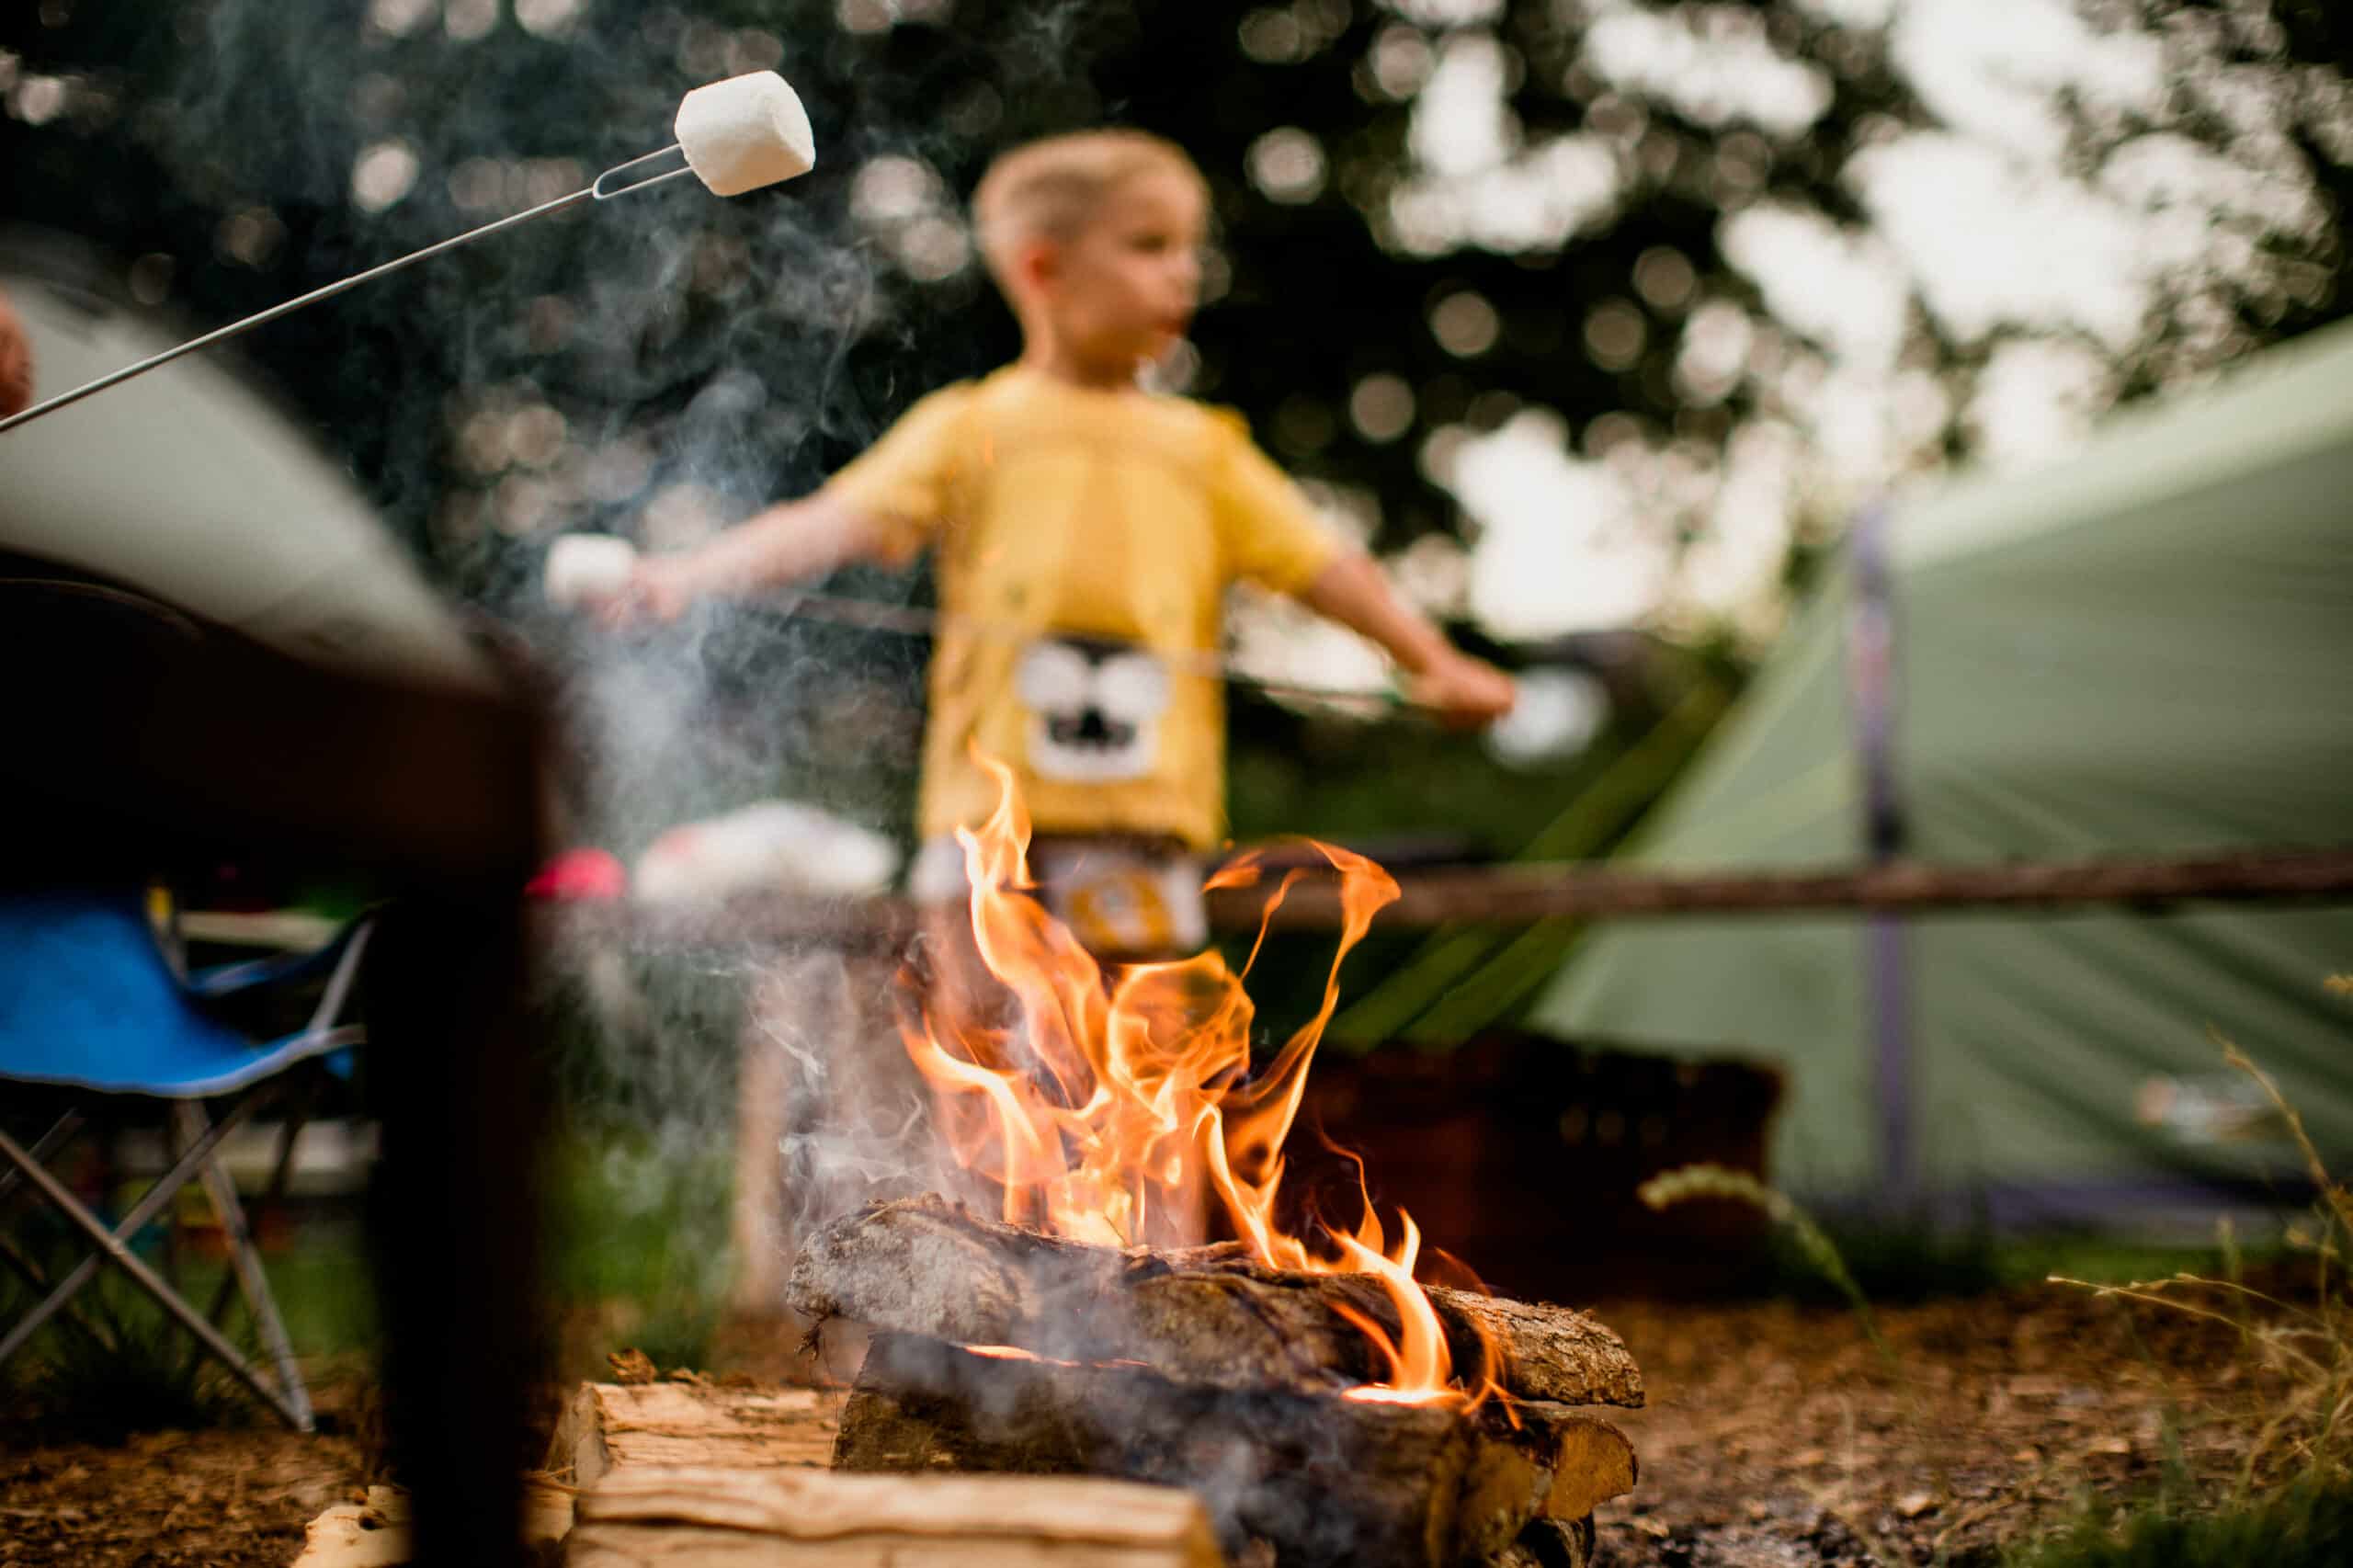 Little Wowos Workshop camping glamping sussex